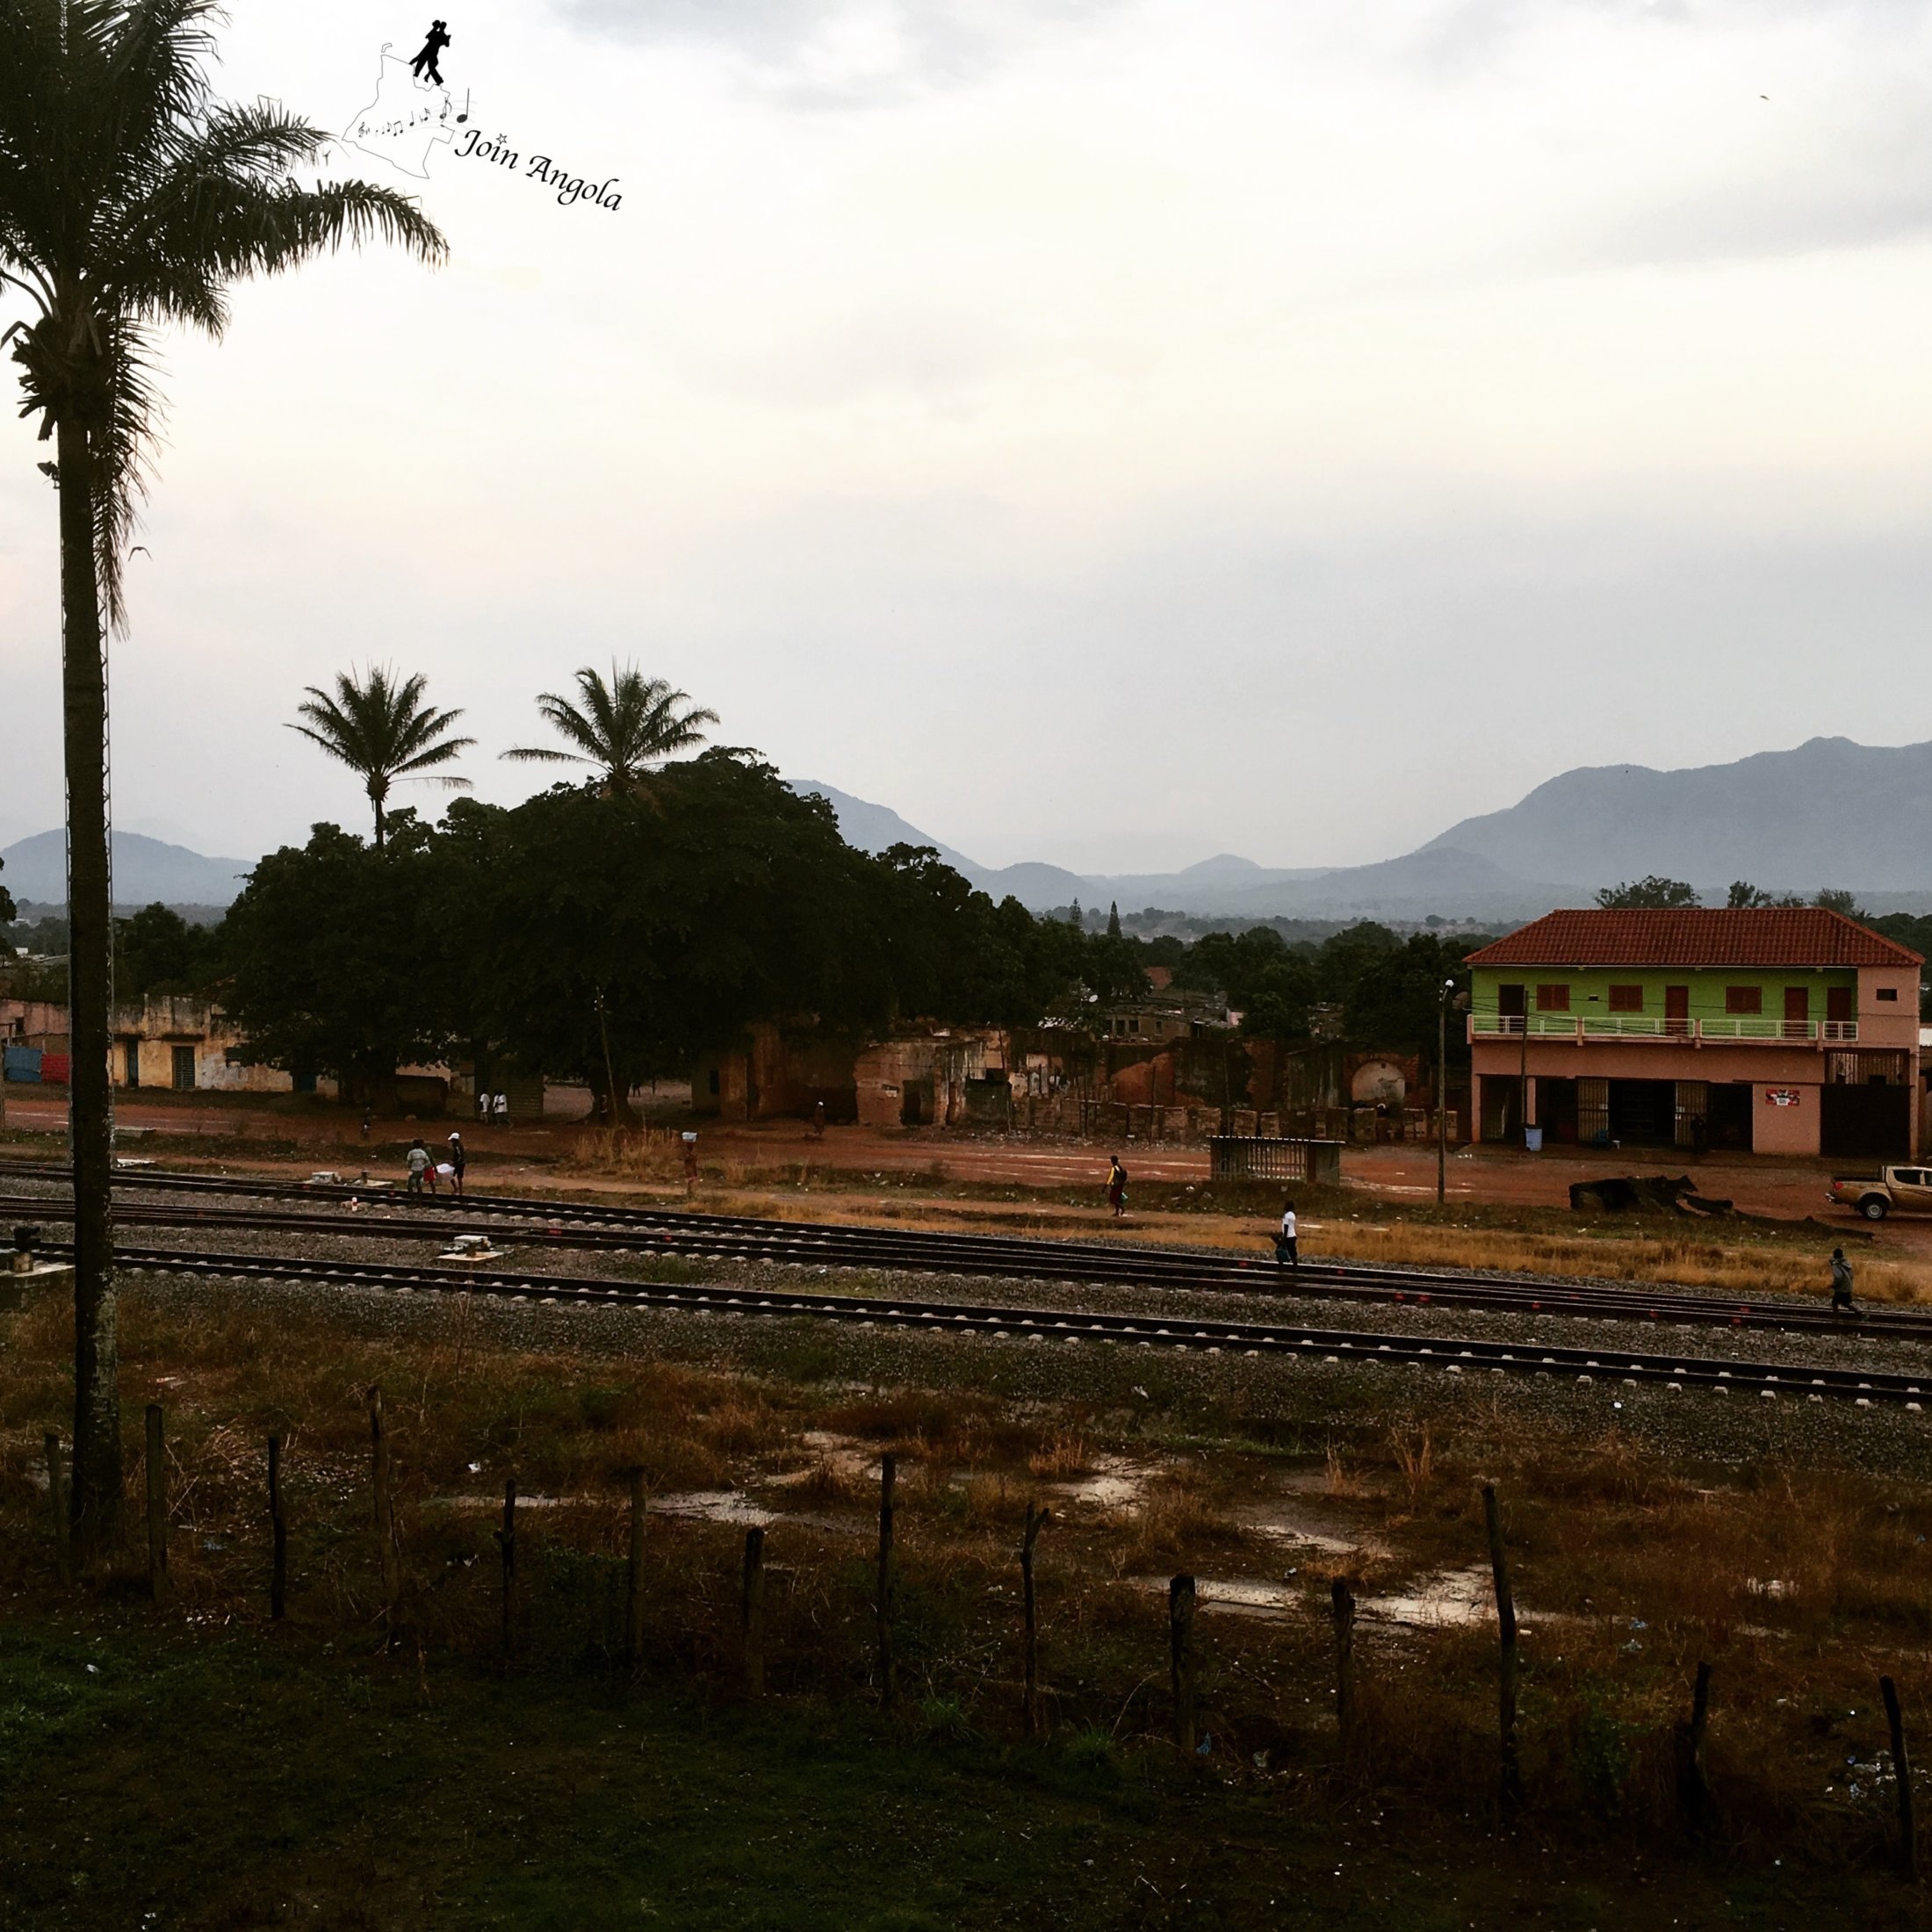 A rainy view of Ganda, another city in the Province of Benguela. A train passes on those railways once or twice a day.